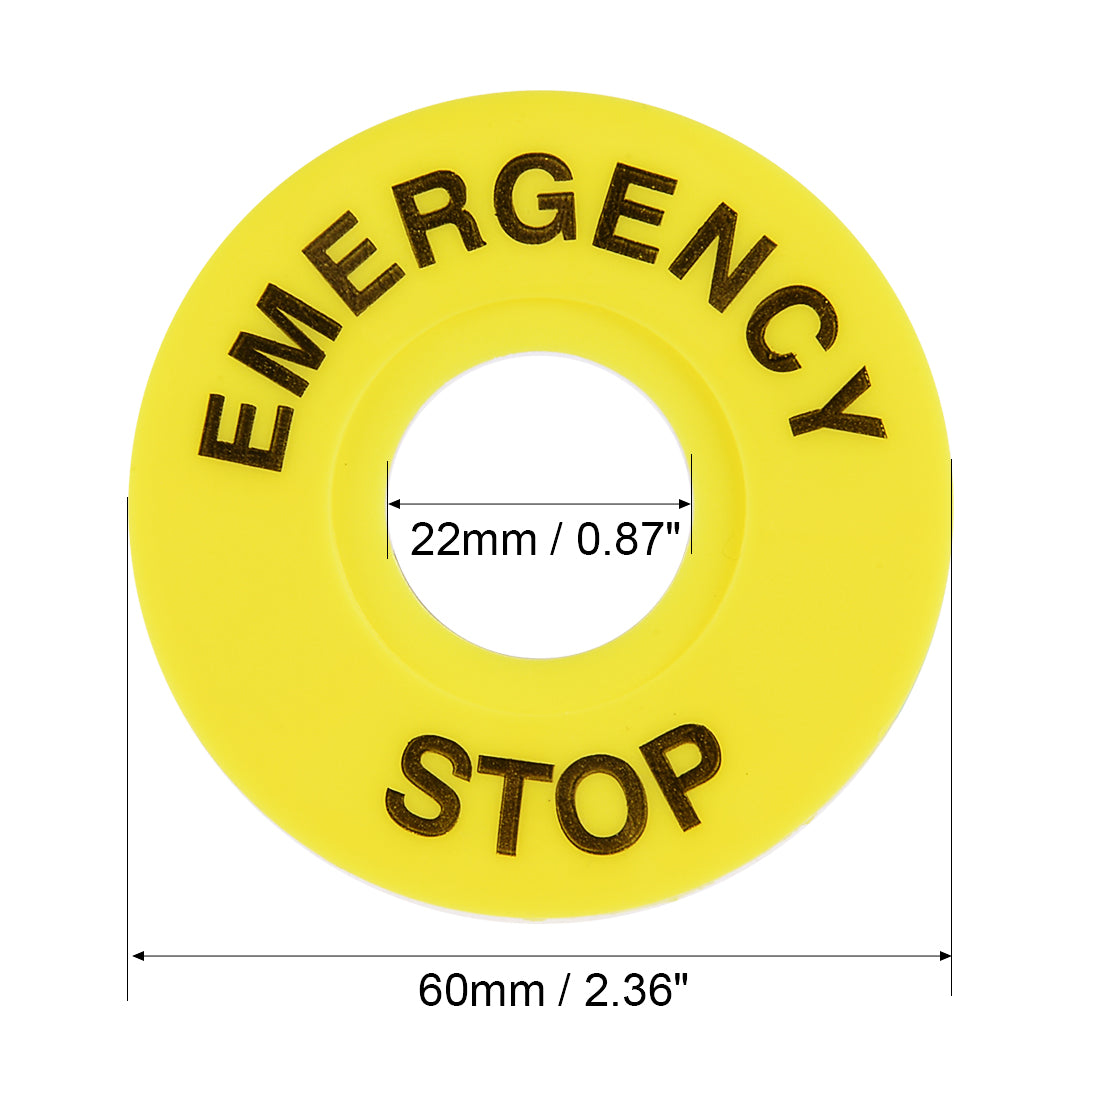 uxcell Uxcell 2 Pcs 22mm Inner Diameter Emergency Stop Sign For Push Button Switch Replacement